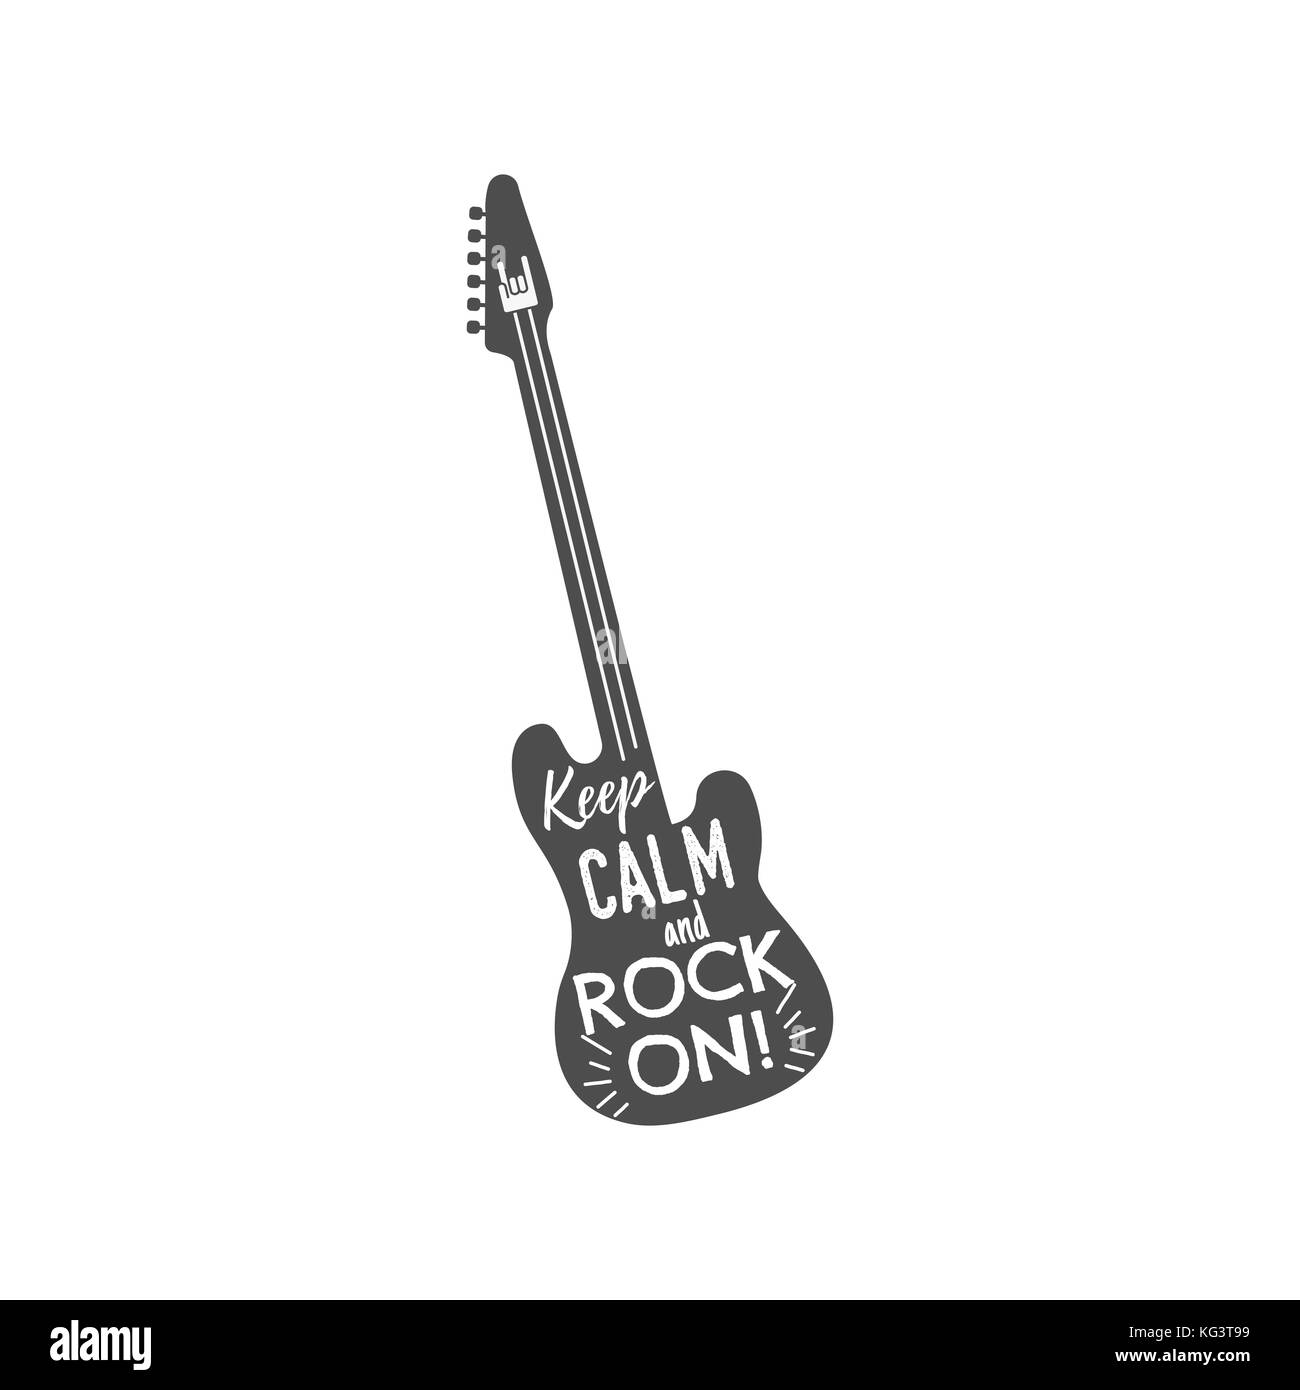 rock guitar emblem with text inside. Keep calm and rock on. Monochrome design for t shirt, prints. Stock illustration isolated on white background Stock Photo